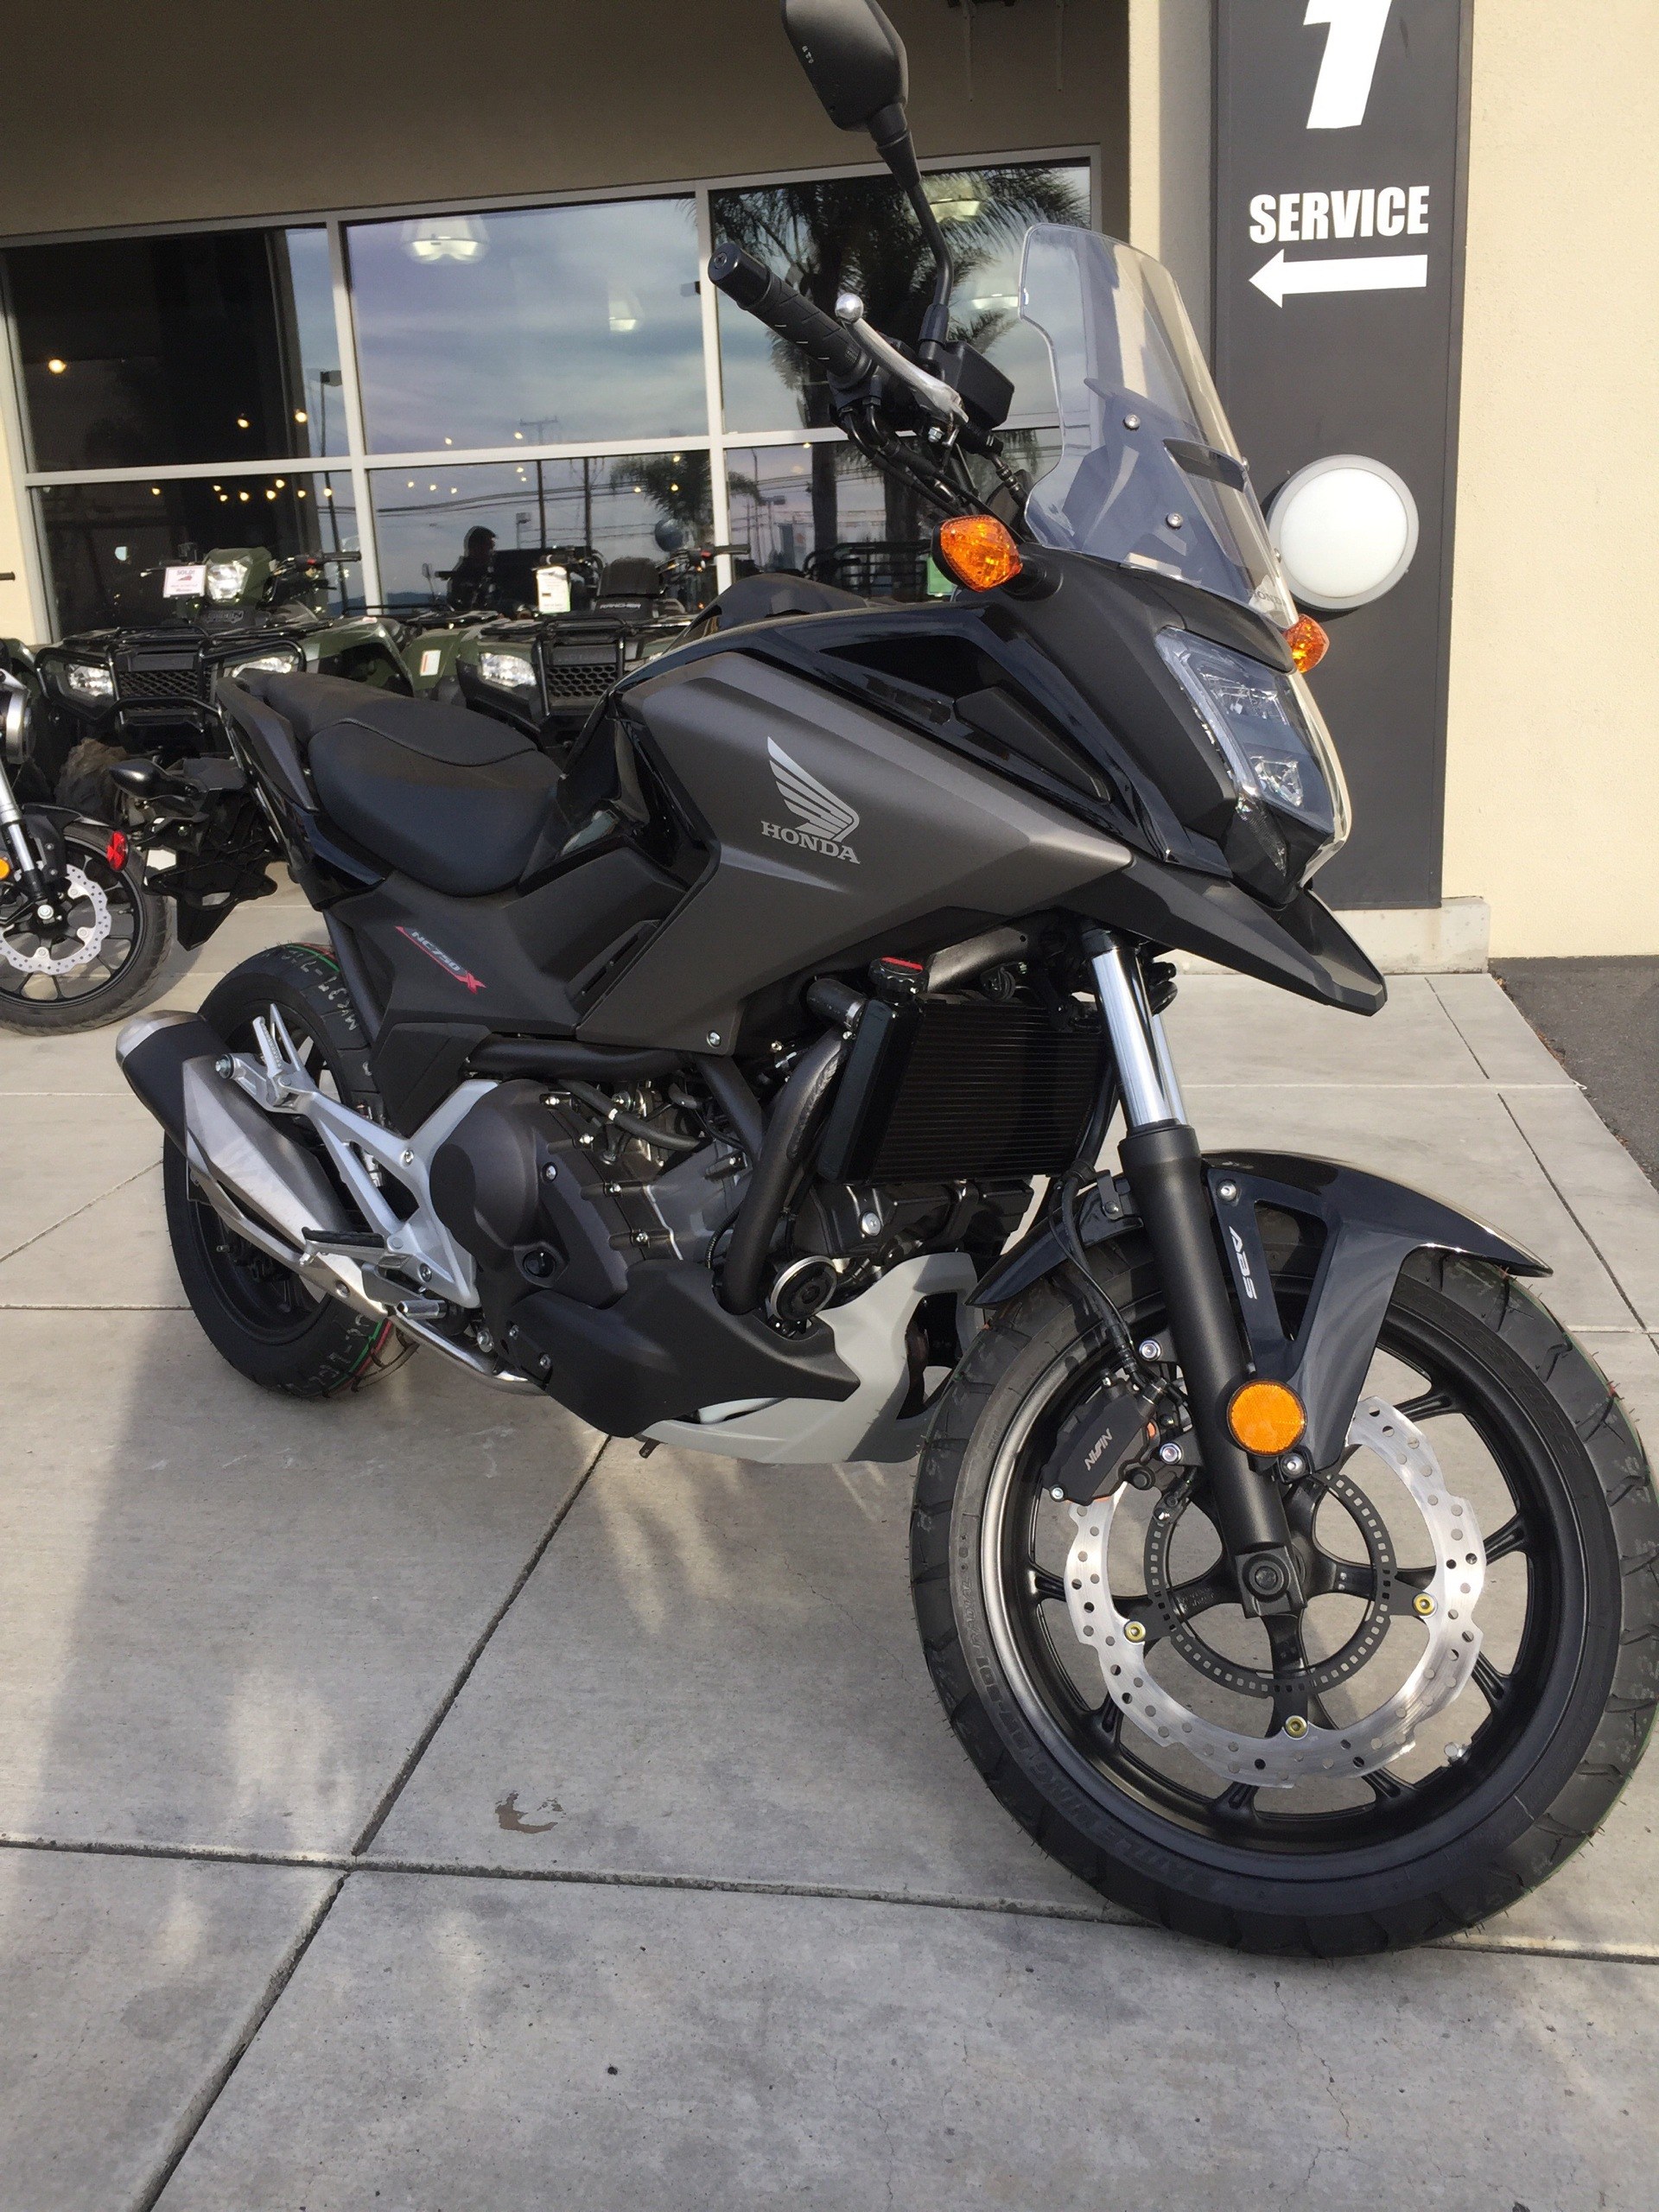 New 2020 Honda Nc750x Dct Abs Motorcycles In Hollister Ca